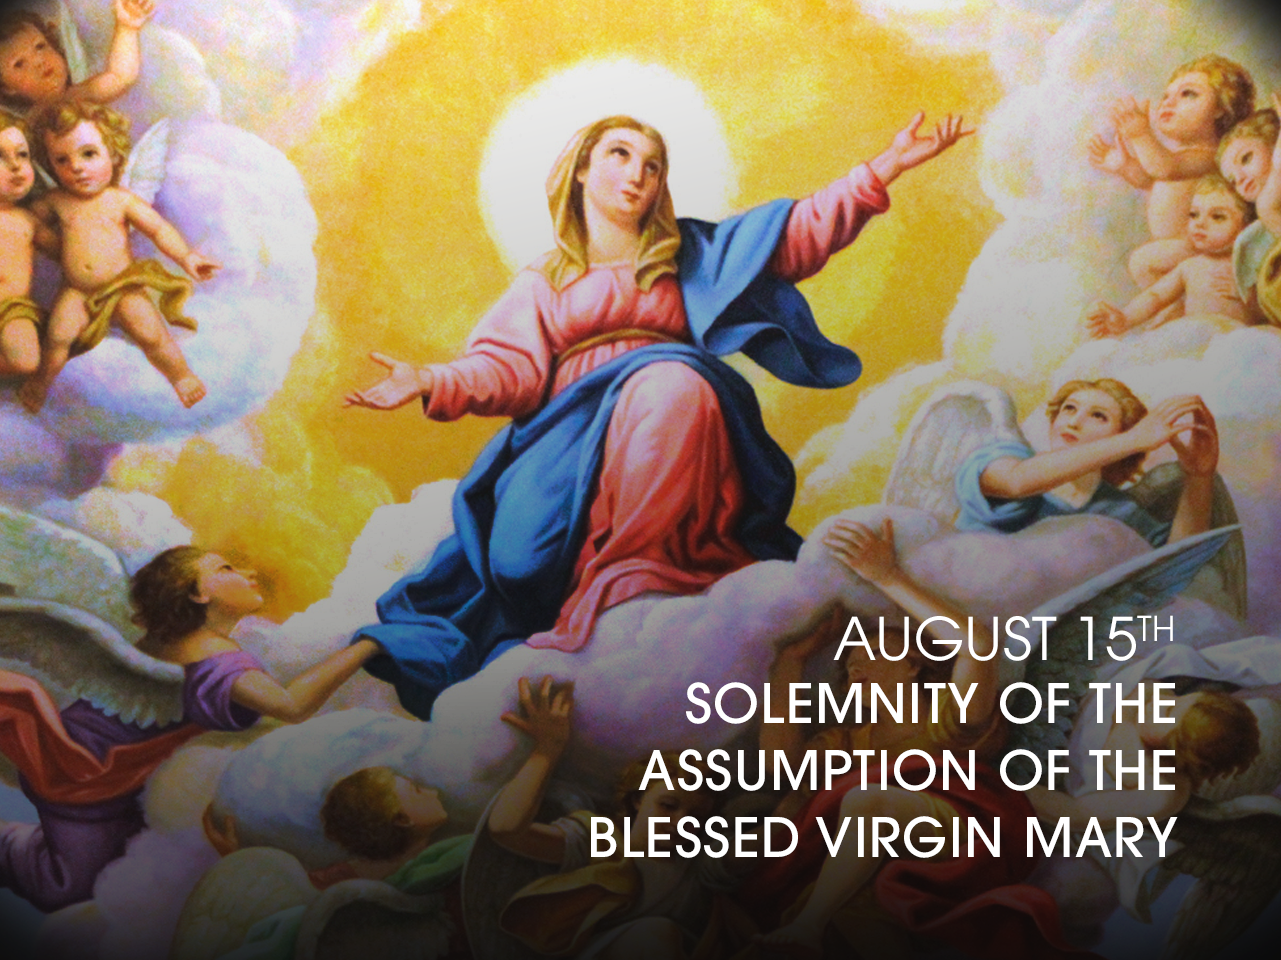 Solemnity of the Assumption